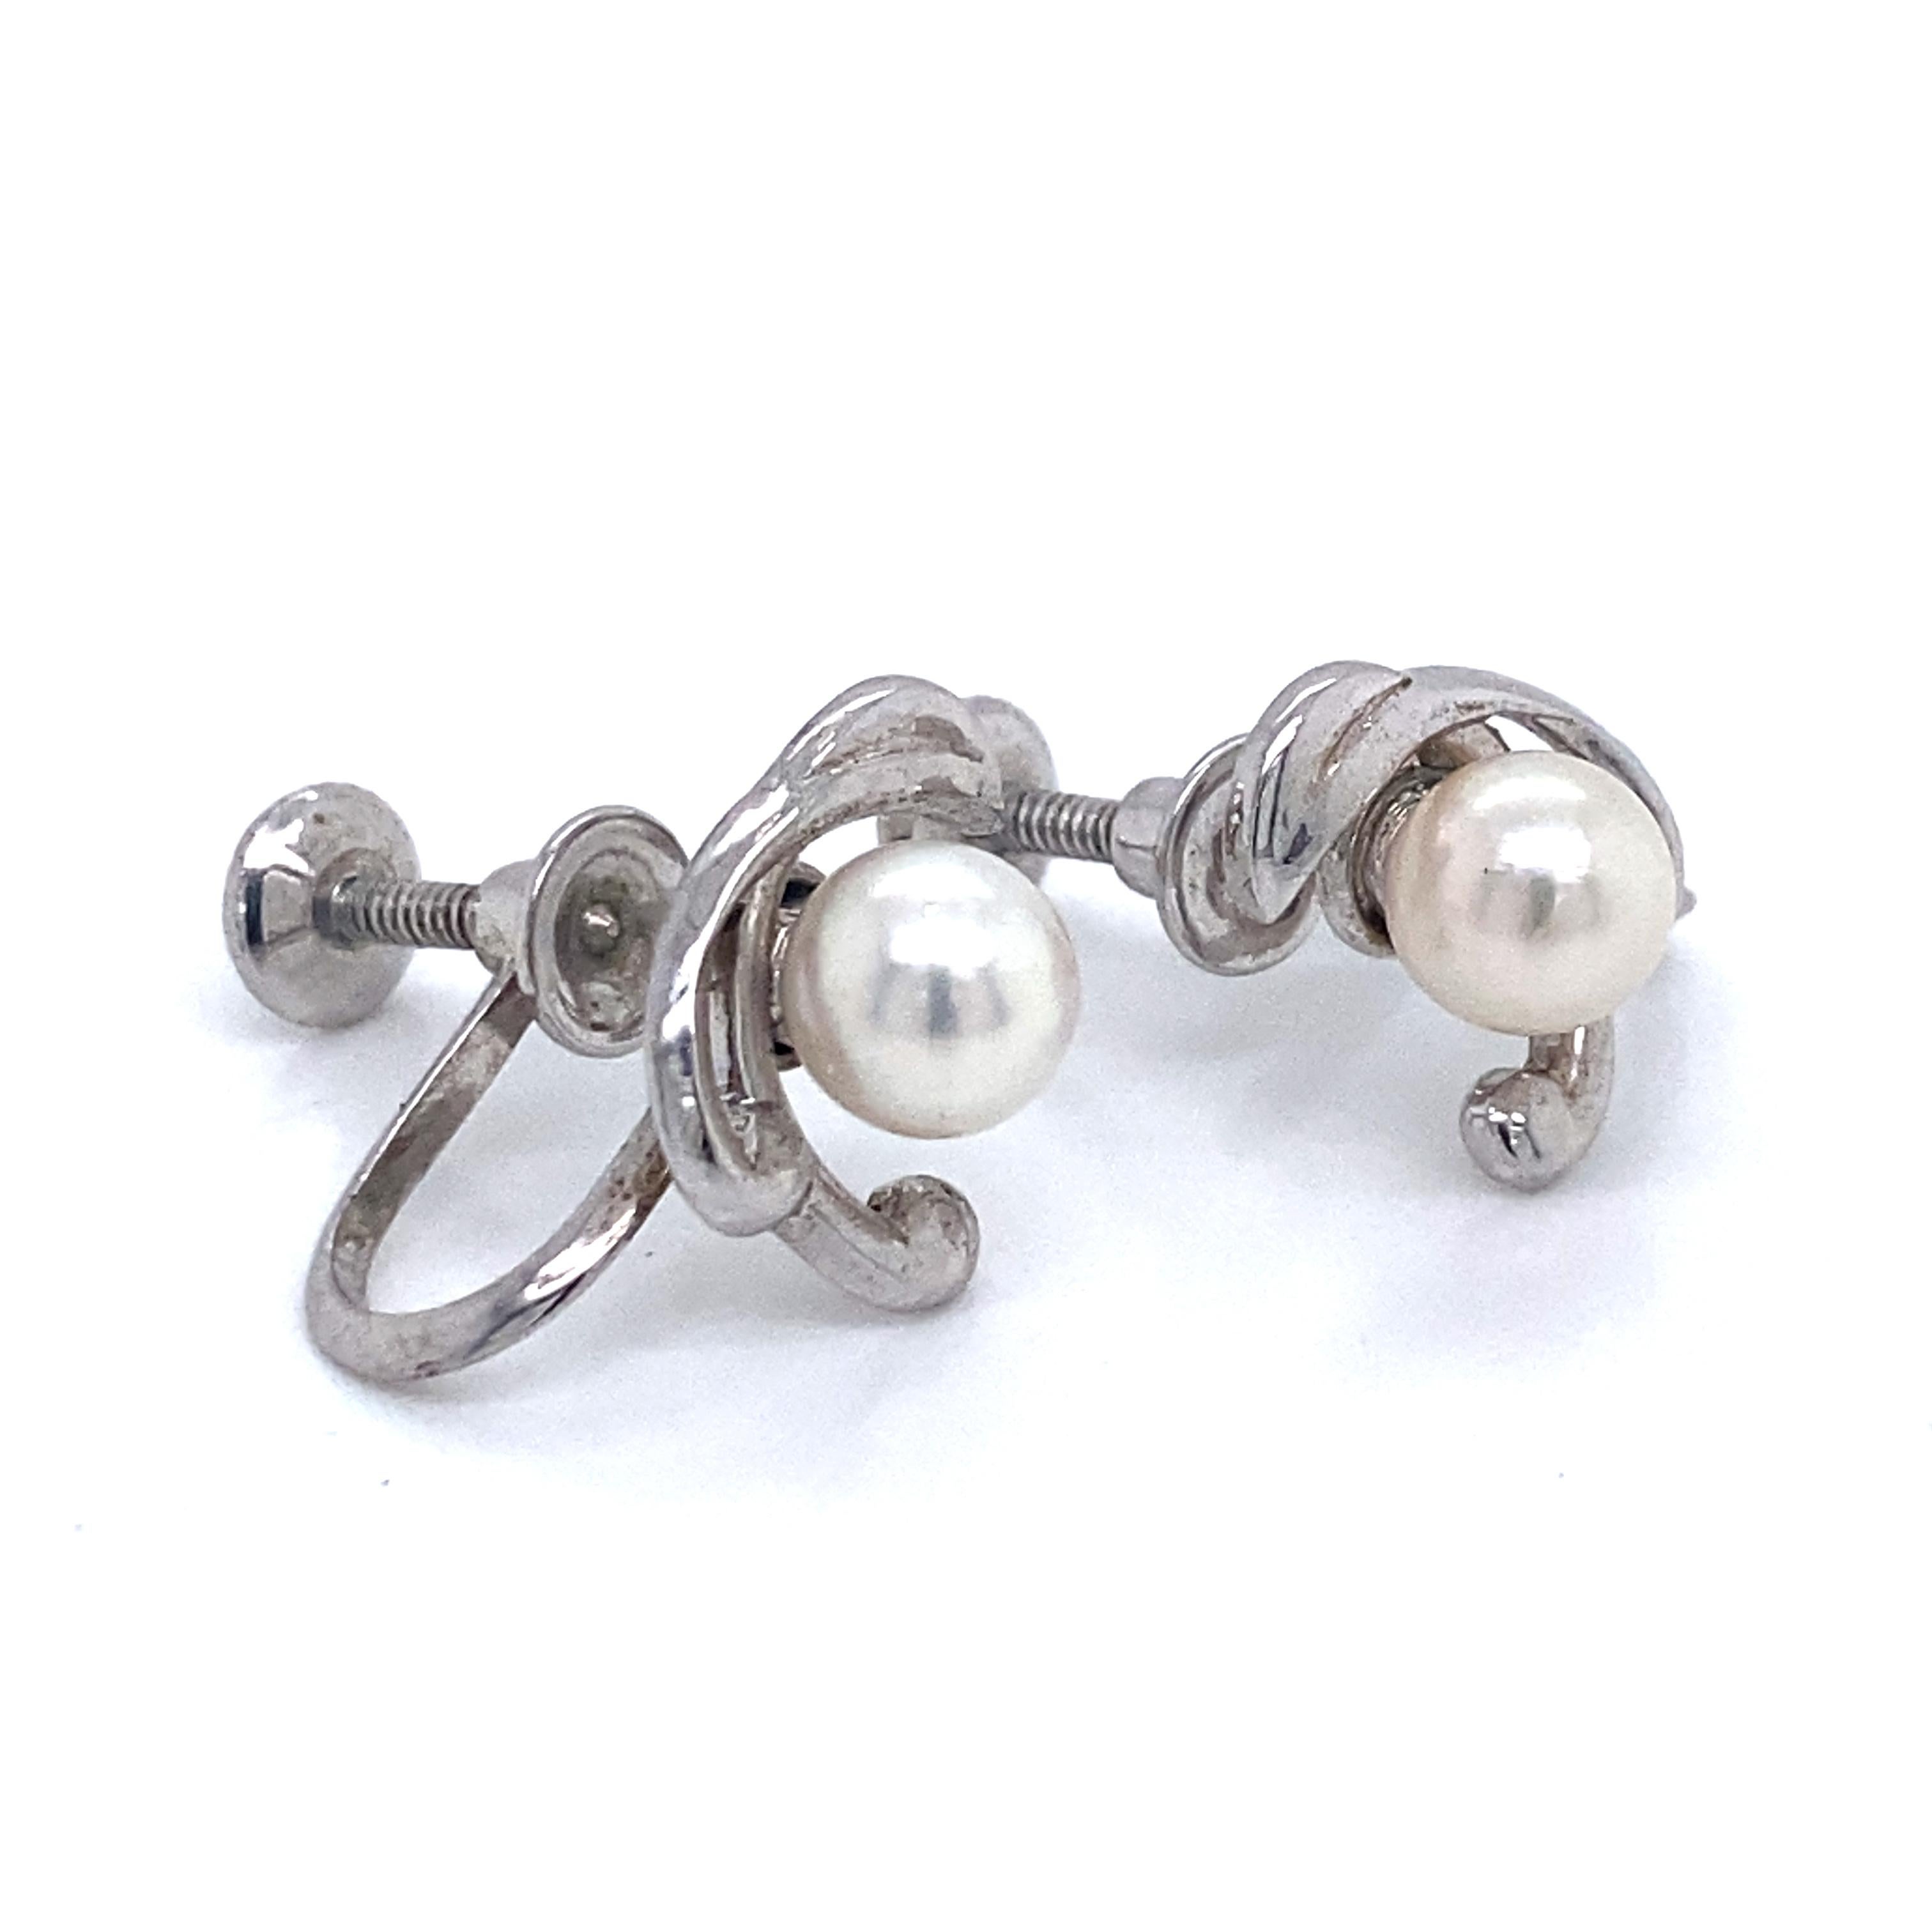 Mikimoto Estate Akoya Pearl Clip On Earrings Sterling Silver 6 mm 3.53 Grams M173

These elegant Authentic Mikimoto Estate Akoya pearl clip-on earrings are made of sterling silver and have 2 Akoya Cultured Pearls in size of 6 mm with a weight of